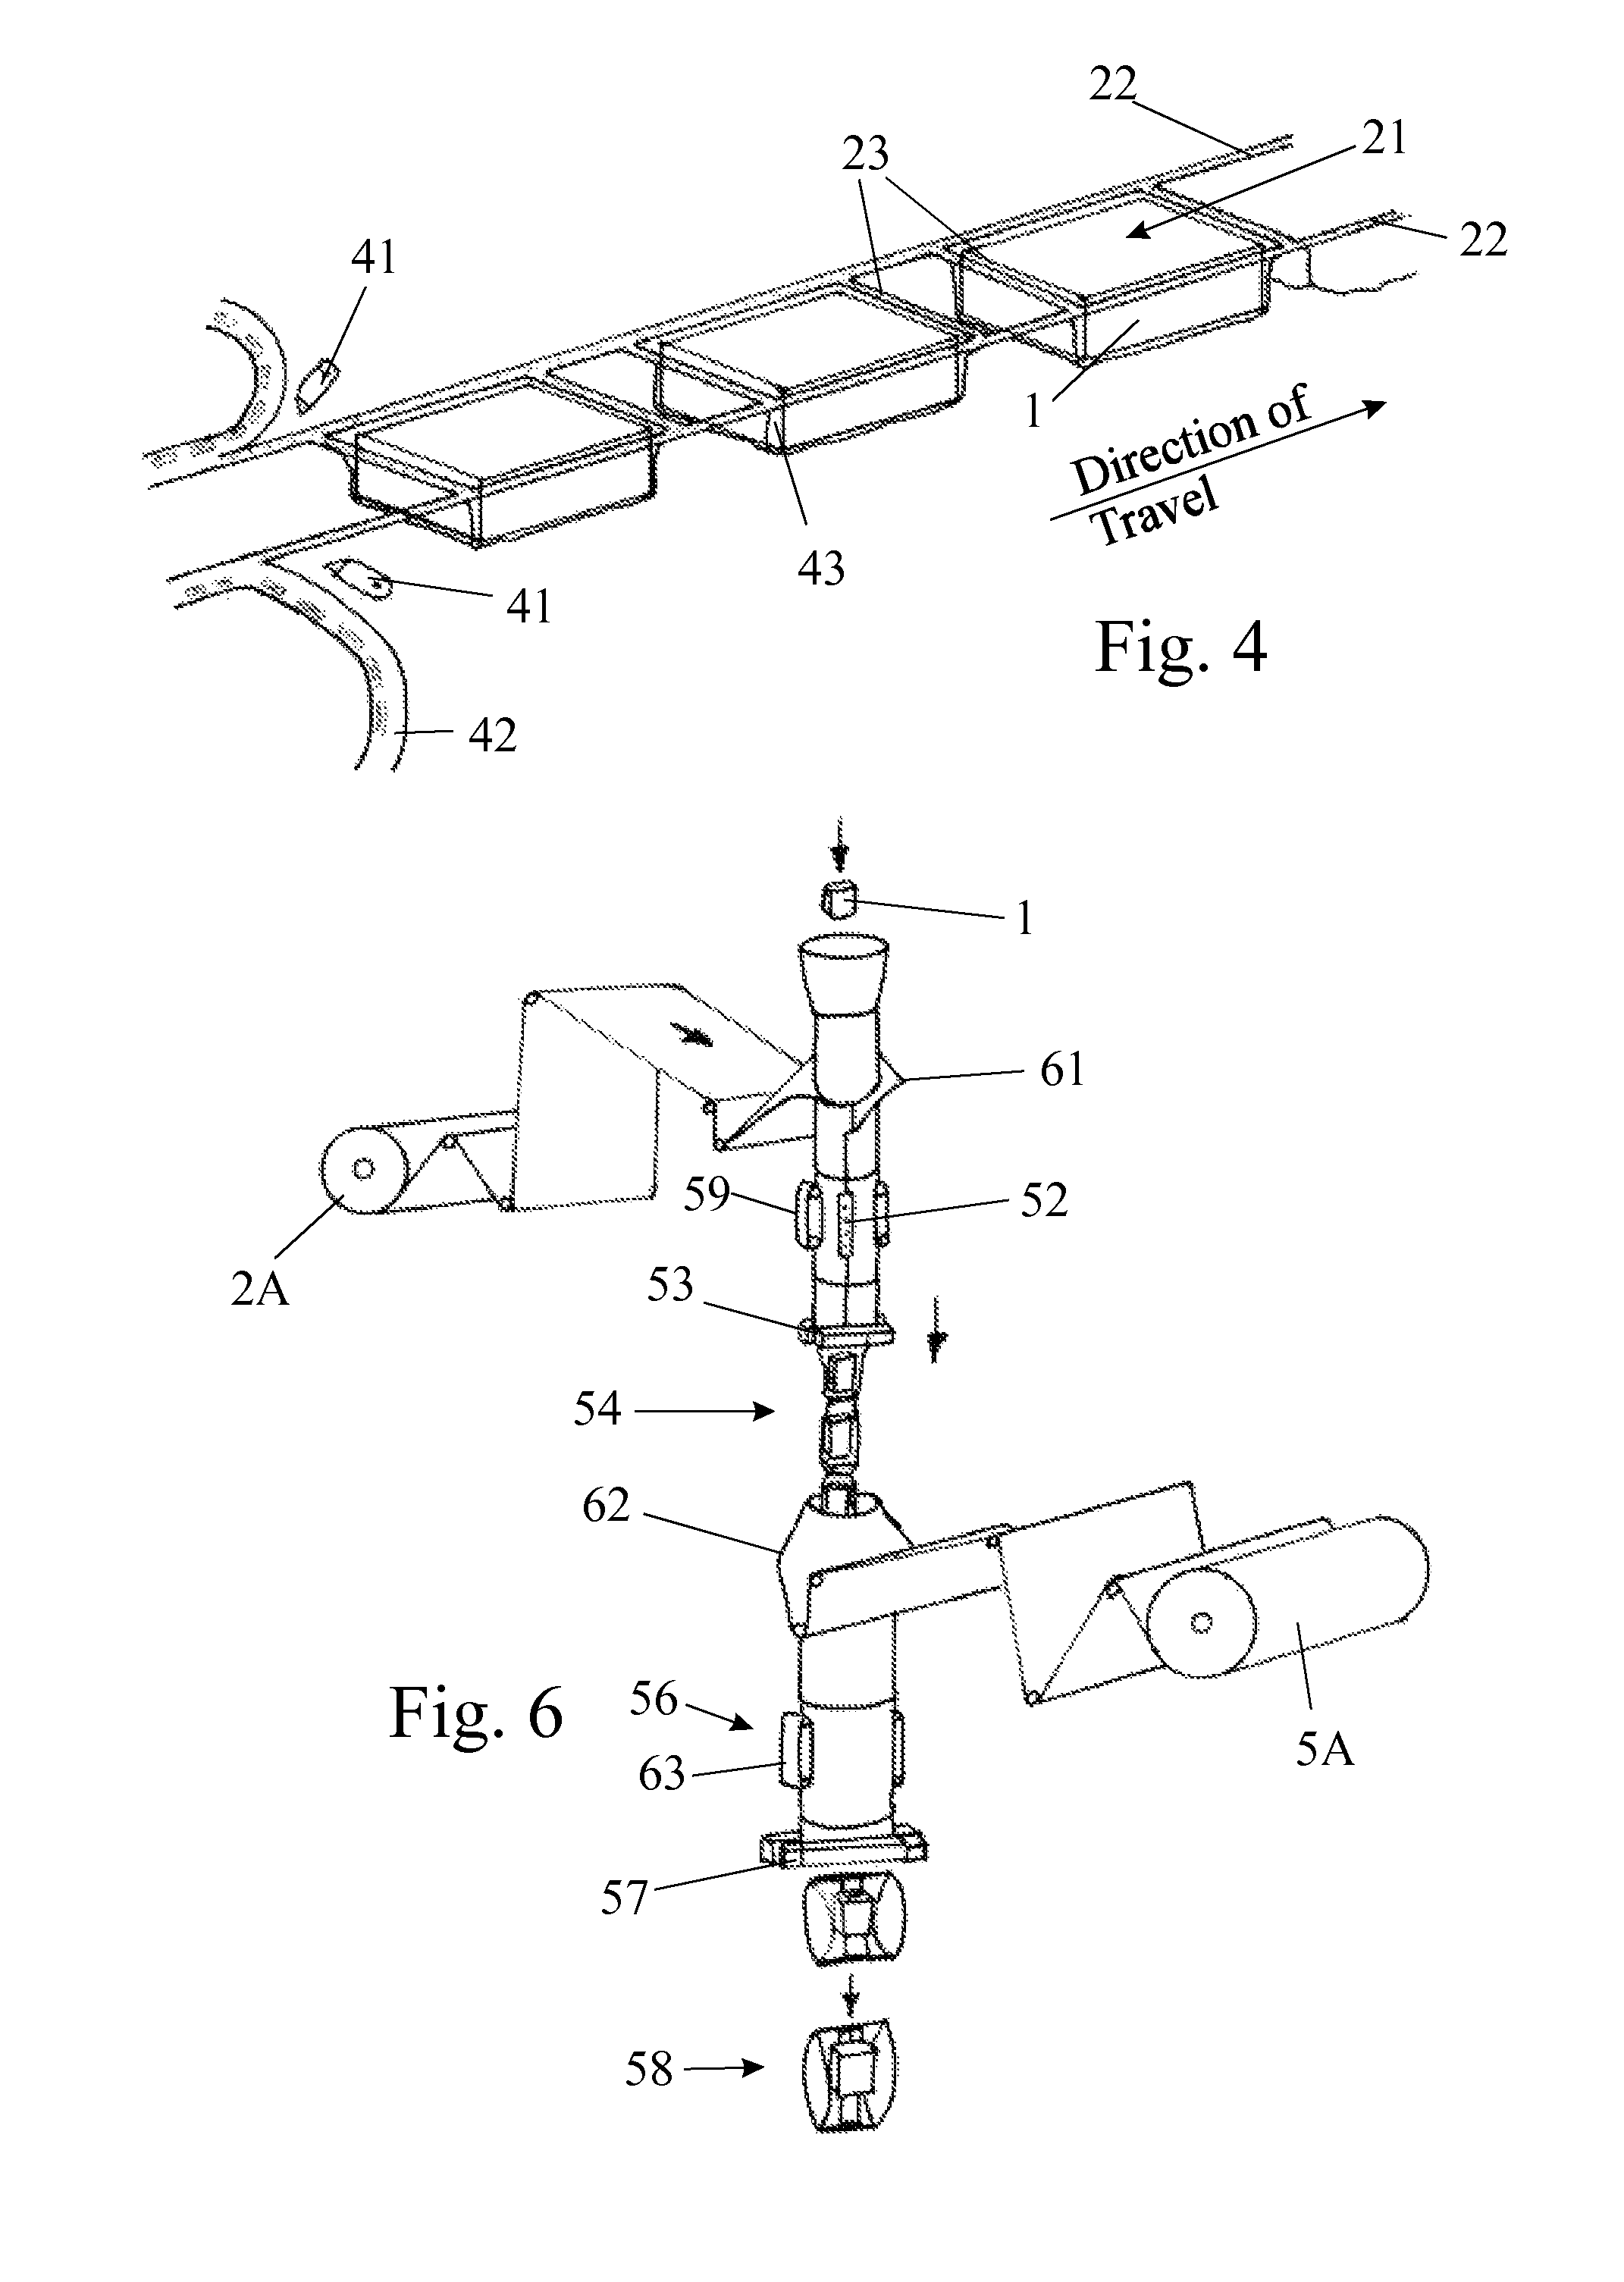 Packaging system and method